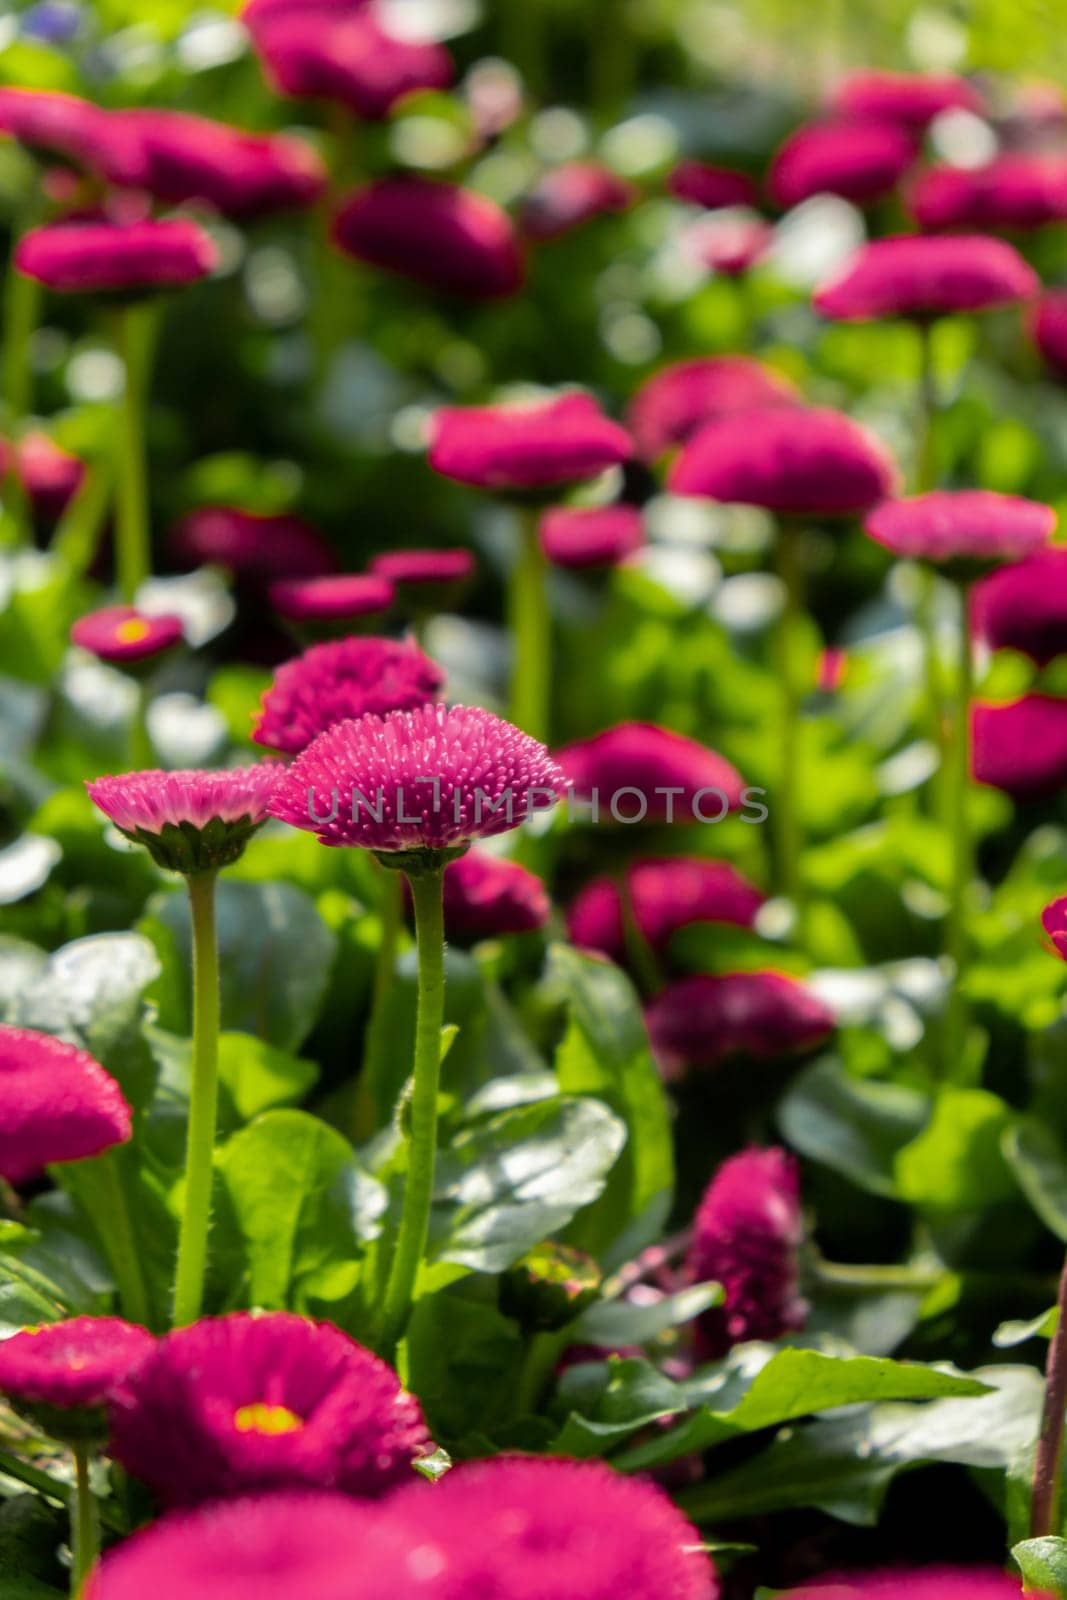 Flowerbed of beautiful pink flowers on green lawn background. Group of delicate flowers in the period of active flowering in spring. Springtime season countryside. Mock up template for invitation or greeting card. Natural backdrop